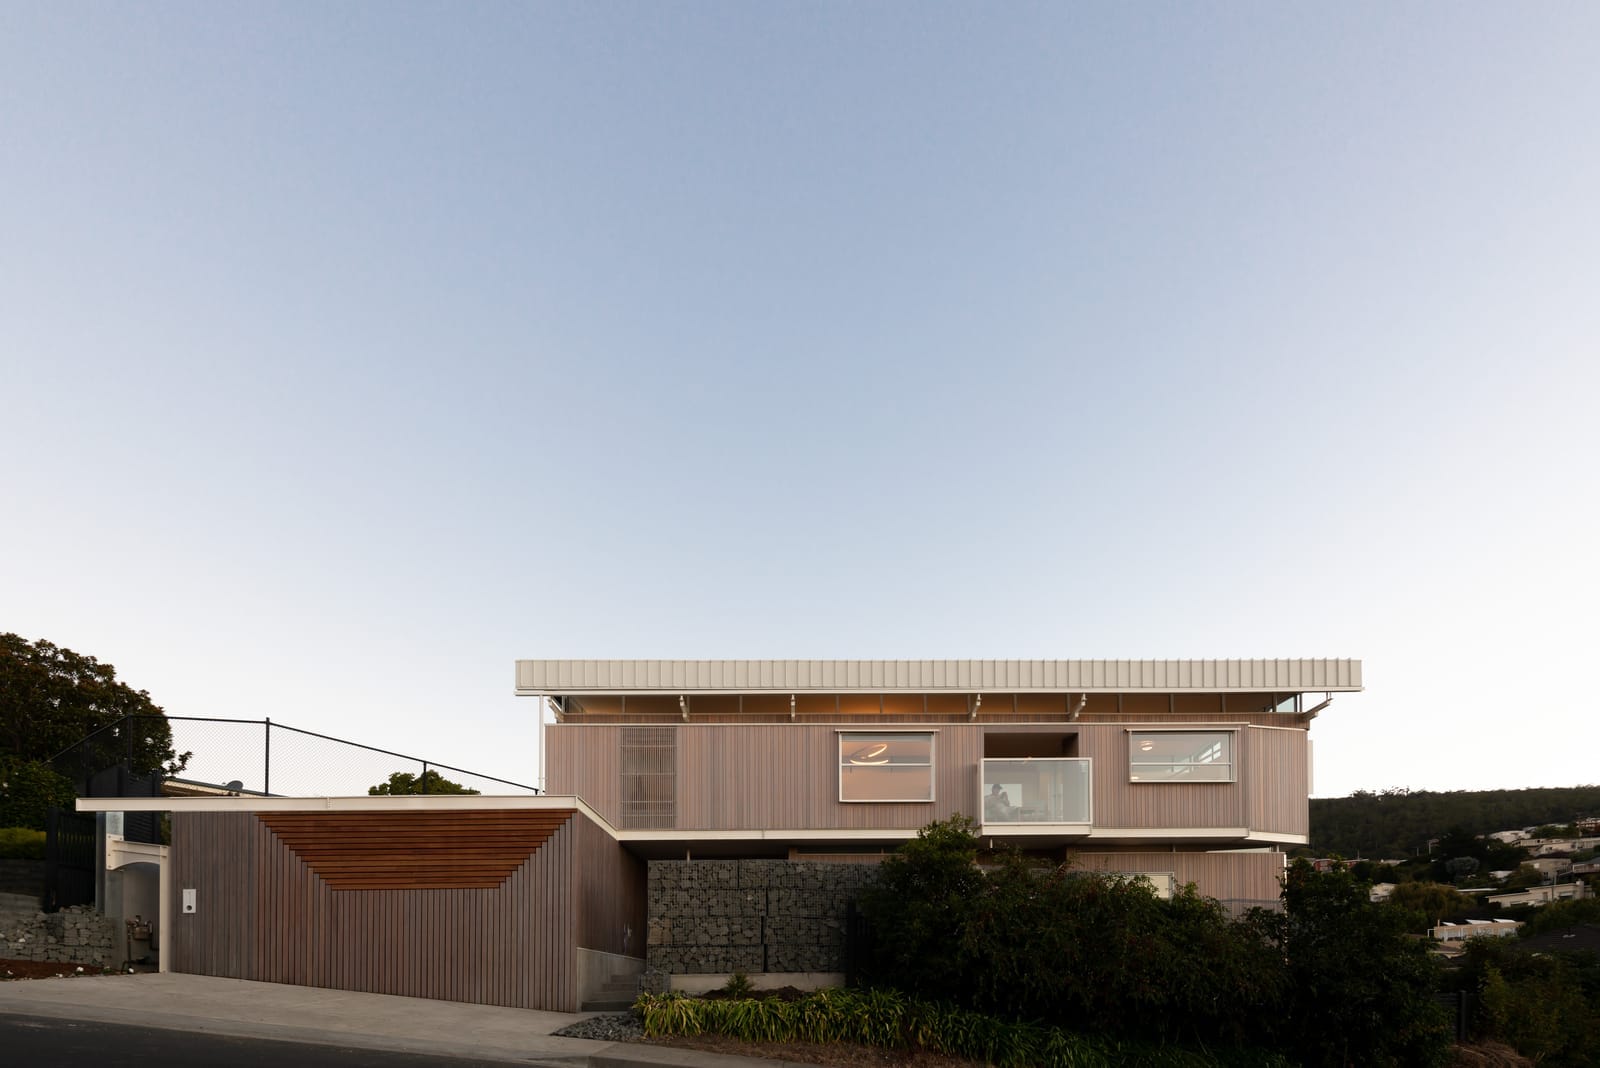 Wattle Bird House by Flett Architecture. Photography by Matt Sansom. Timber clad facade of double storey home. Rolling hills in background.